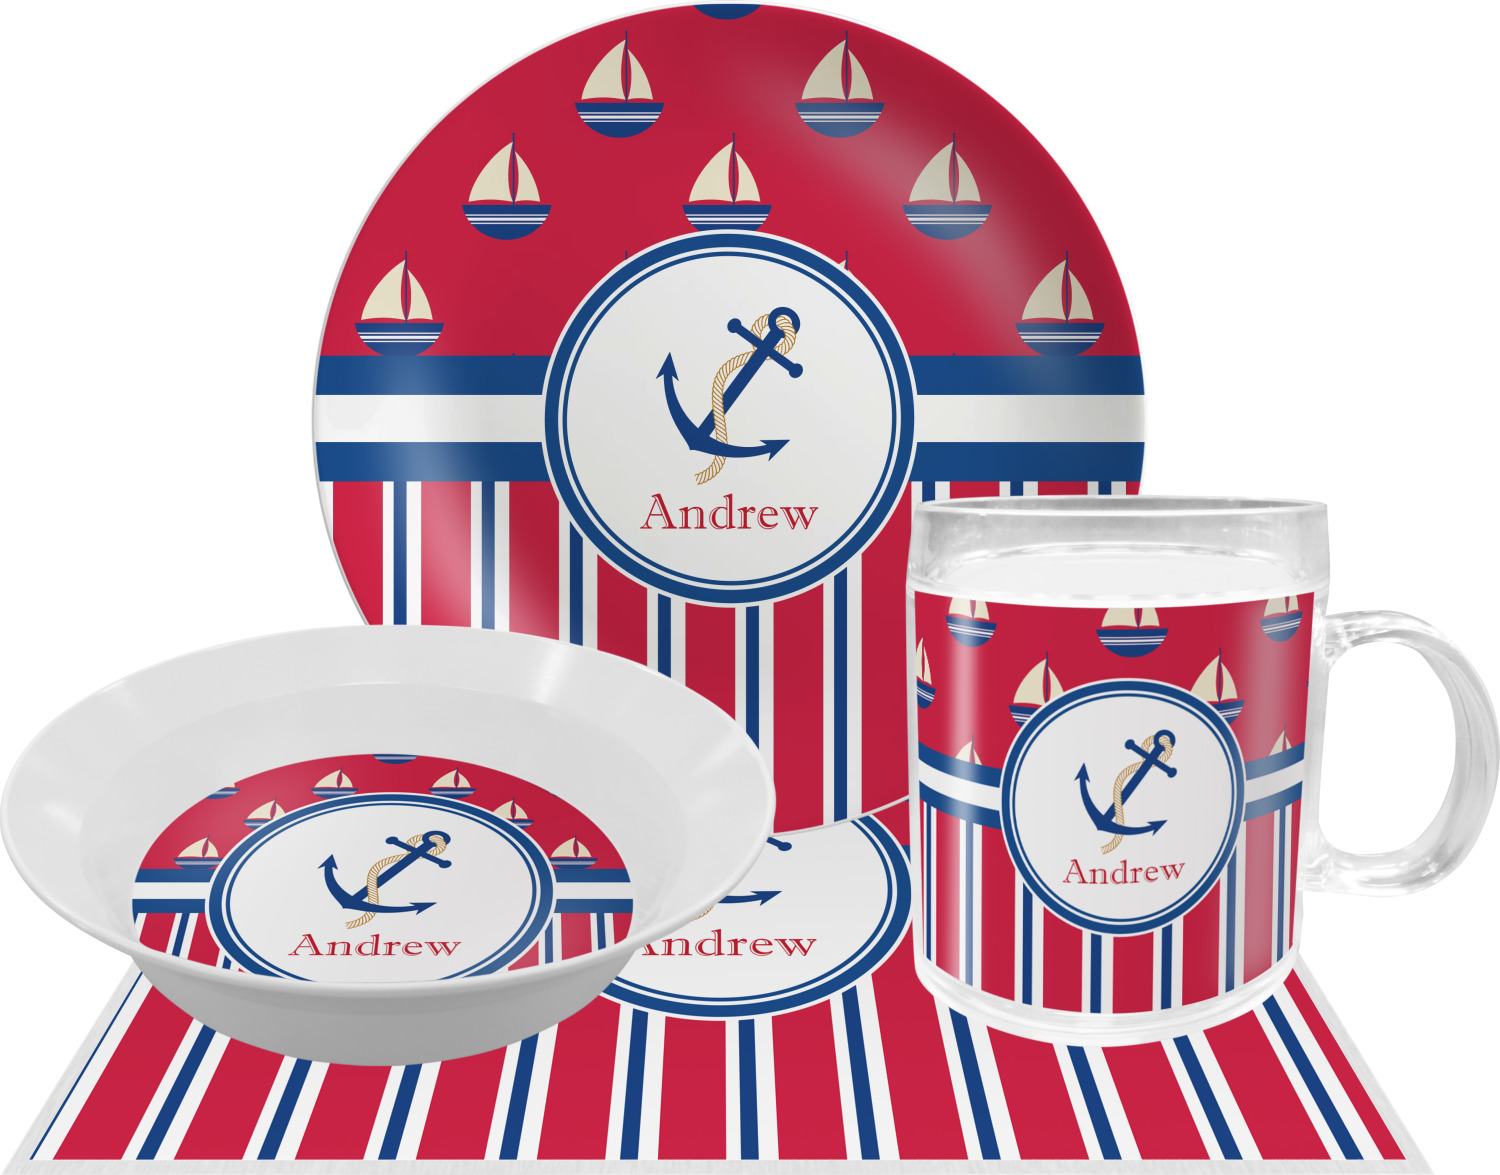 https://www.youcustomizeit.com/common/MAKE/40846/Sail-Boats-Stripes-Dinner-Set-4-Pc-Personalized.jpg?lm=1659809724